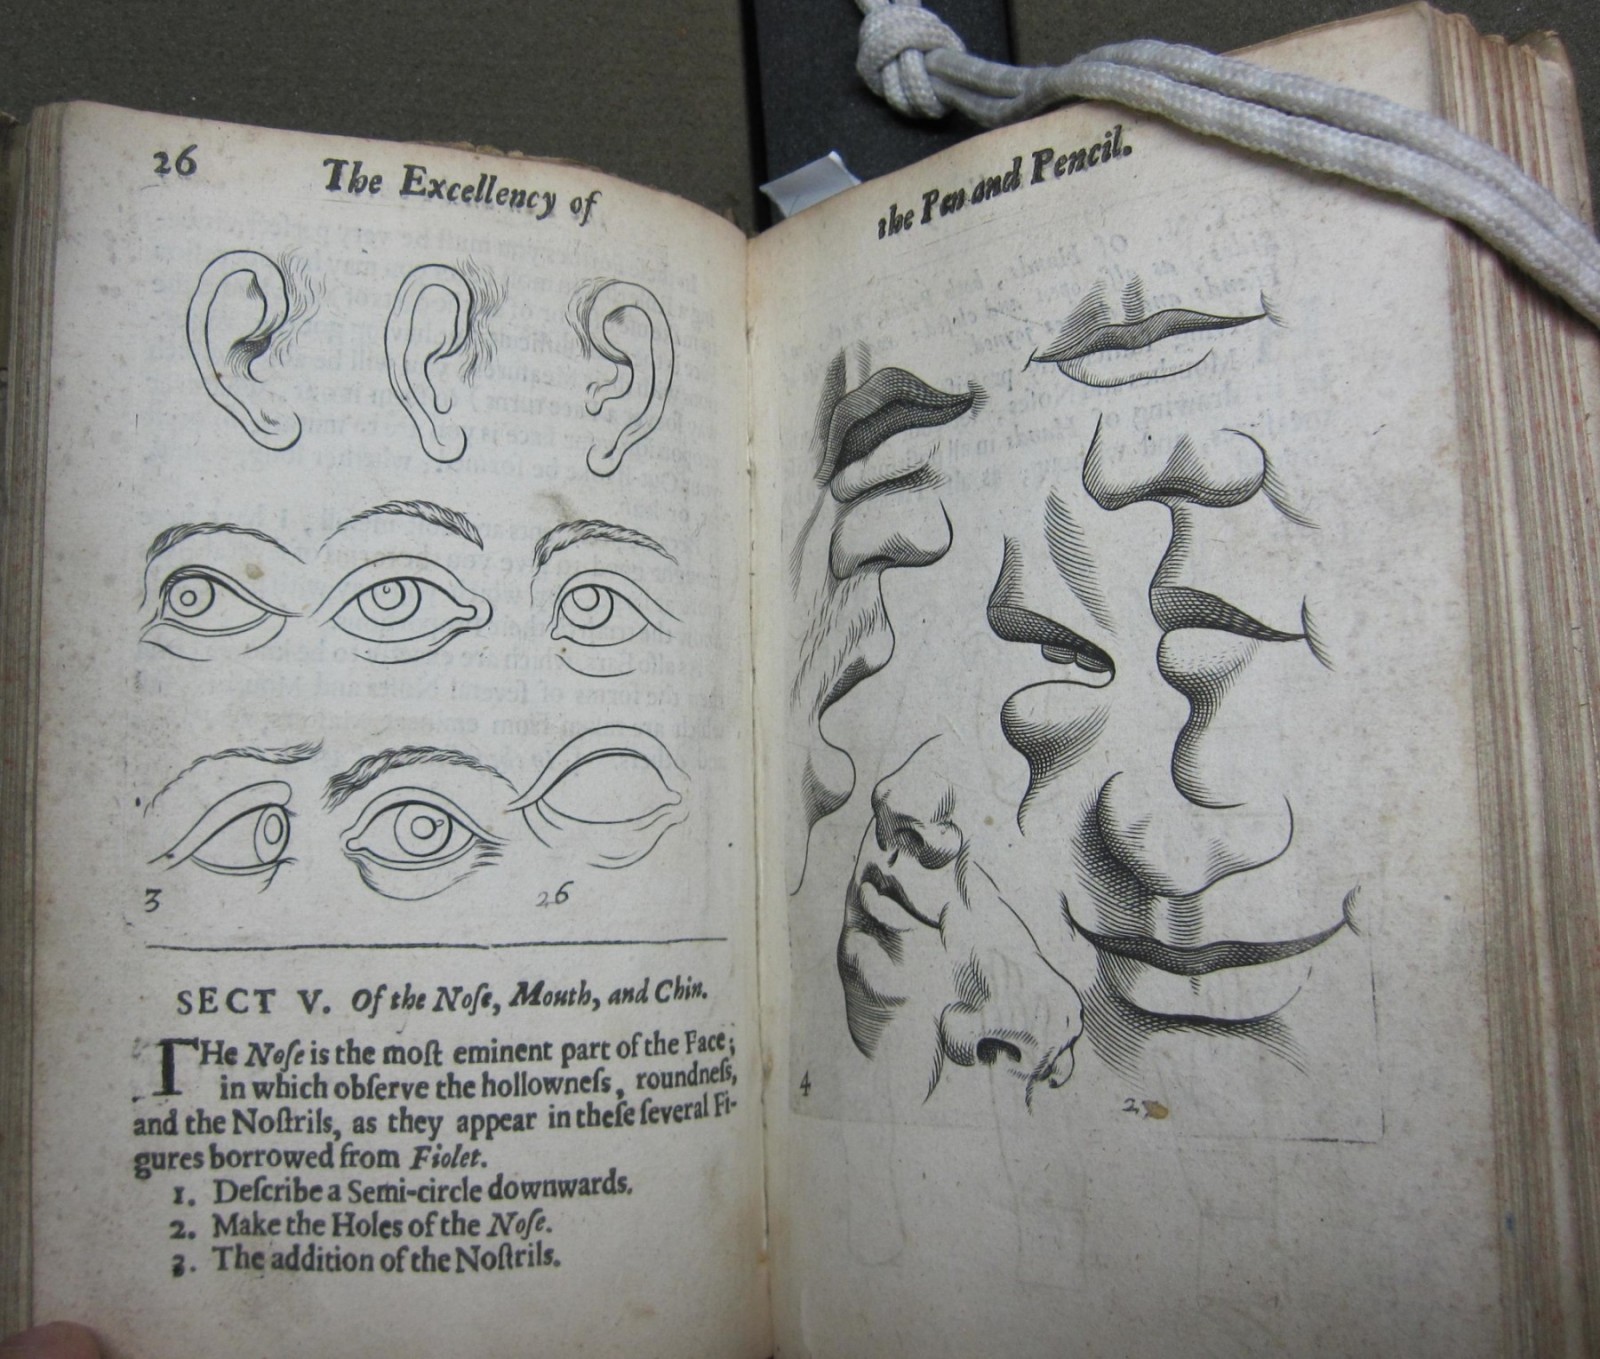 Engravings of ears, eyes, mouths, and noses